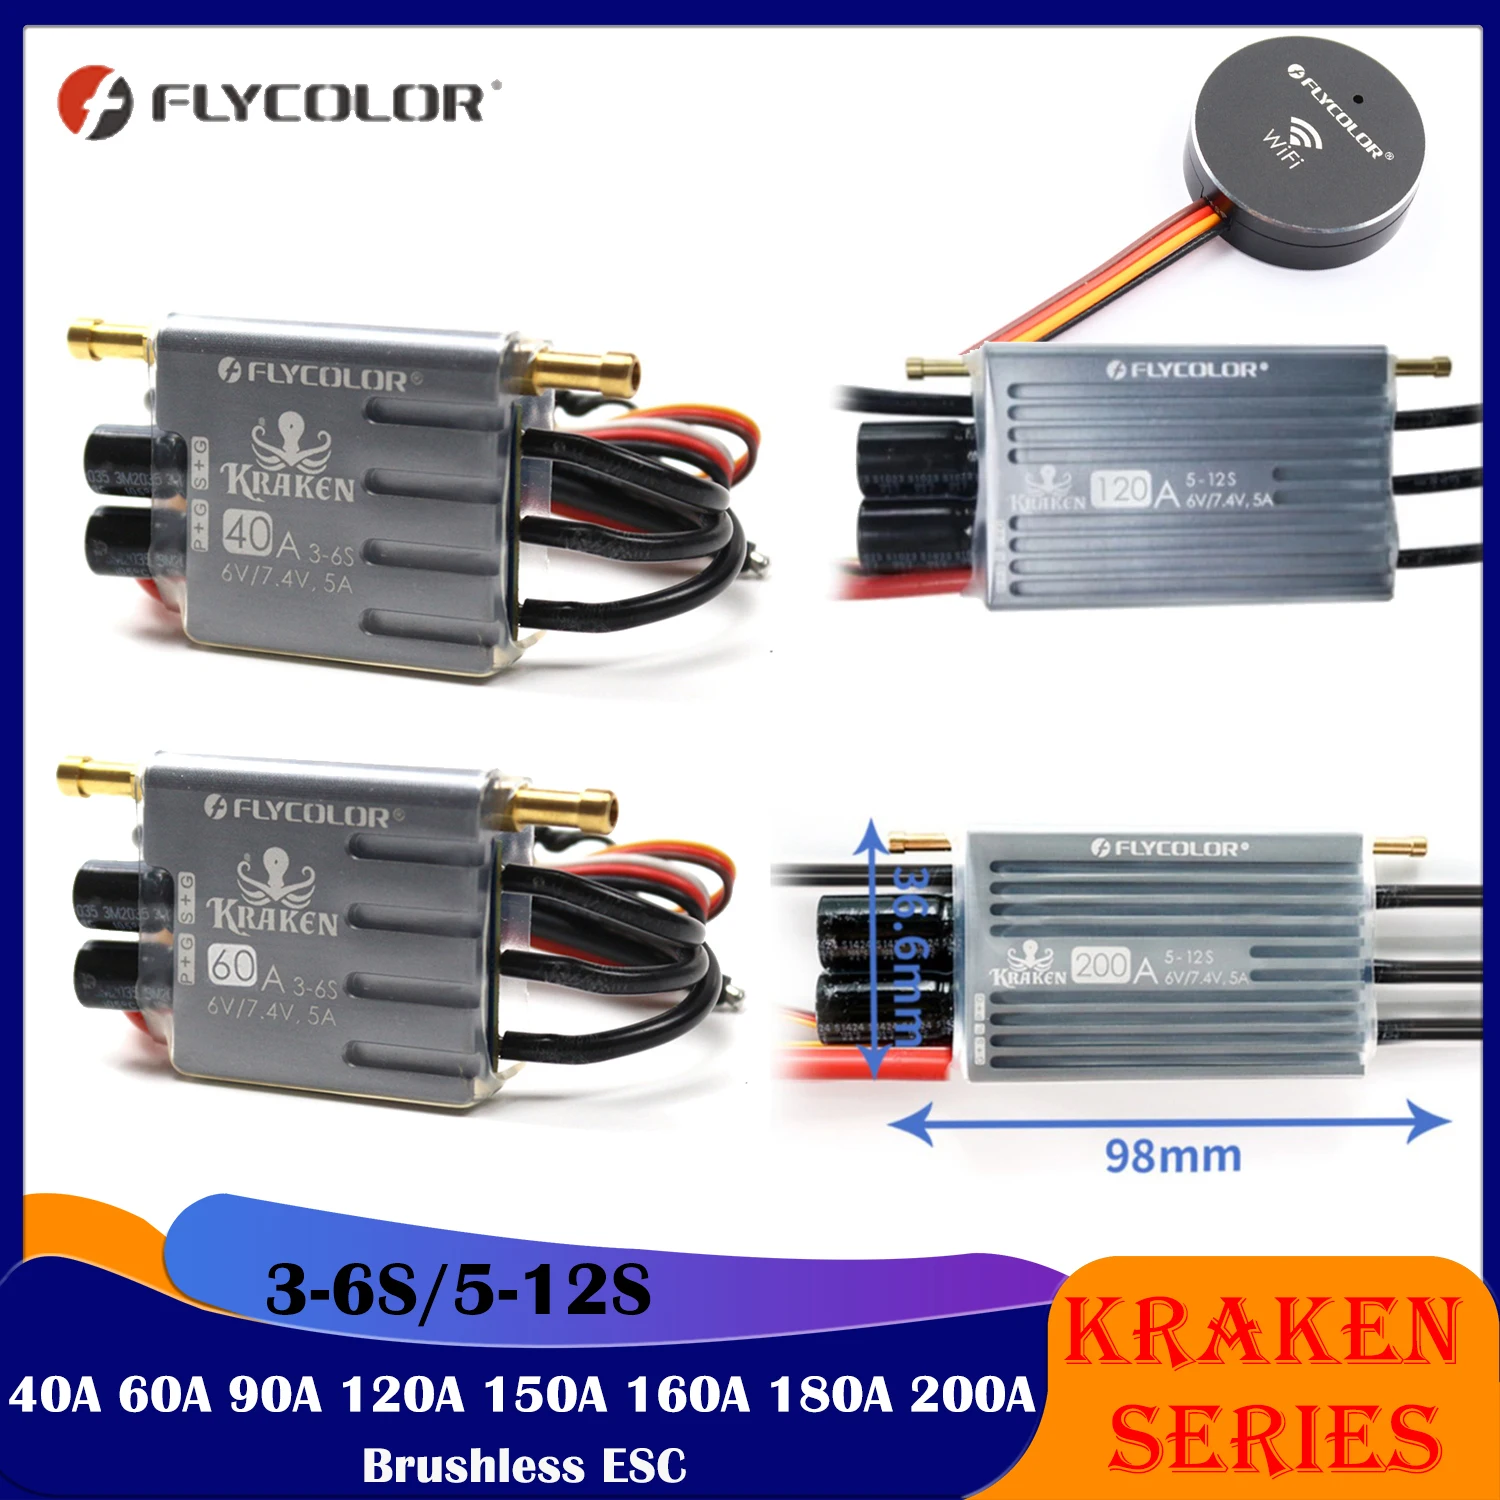 

FLYCOLOR Kraken Series RC Boat Brushless ESC 40A 60A 90A 120A 150A 160A 180A 200A 3-6S/5-12S Waterproof for Model Racing Part